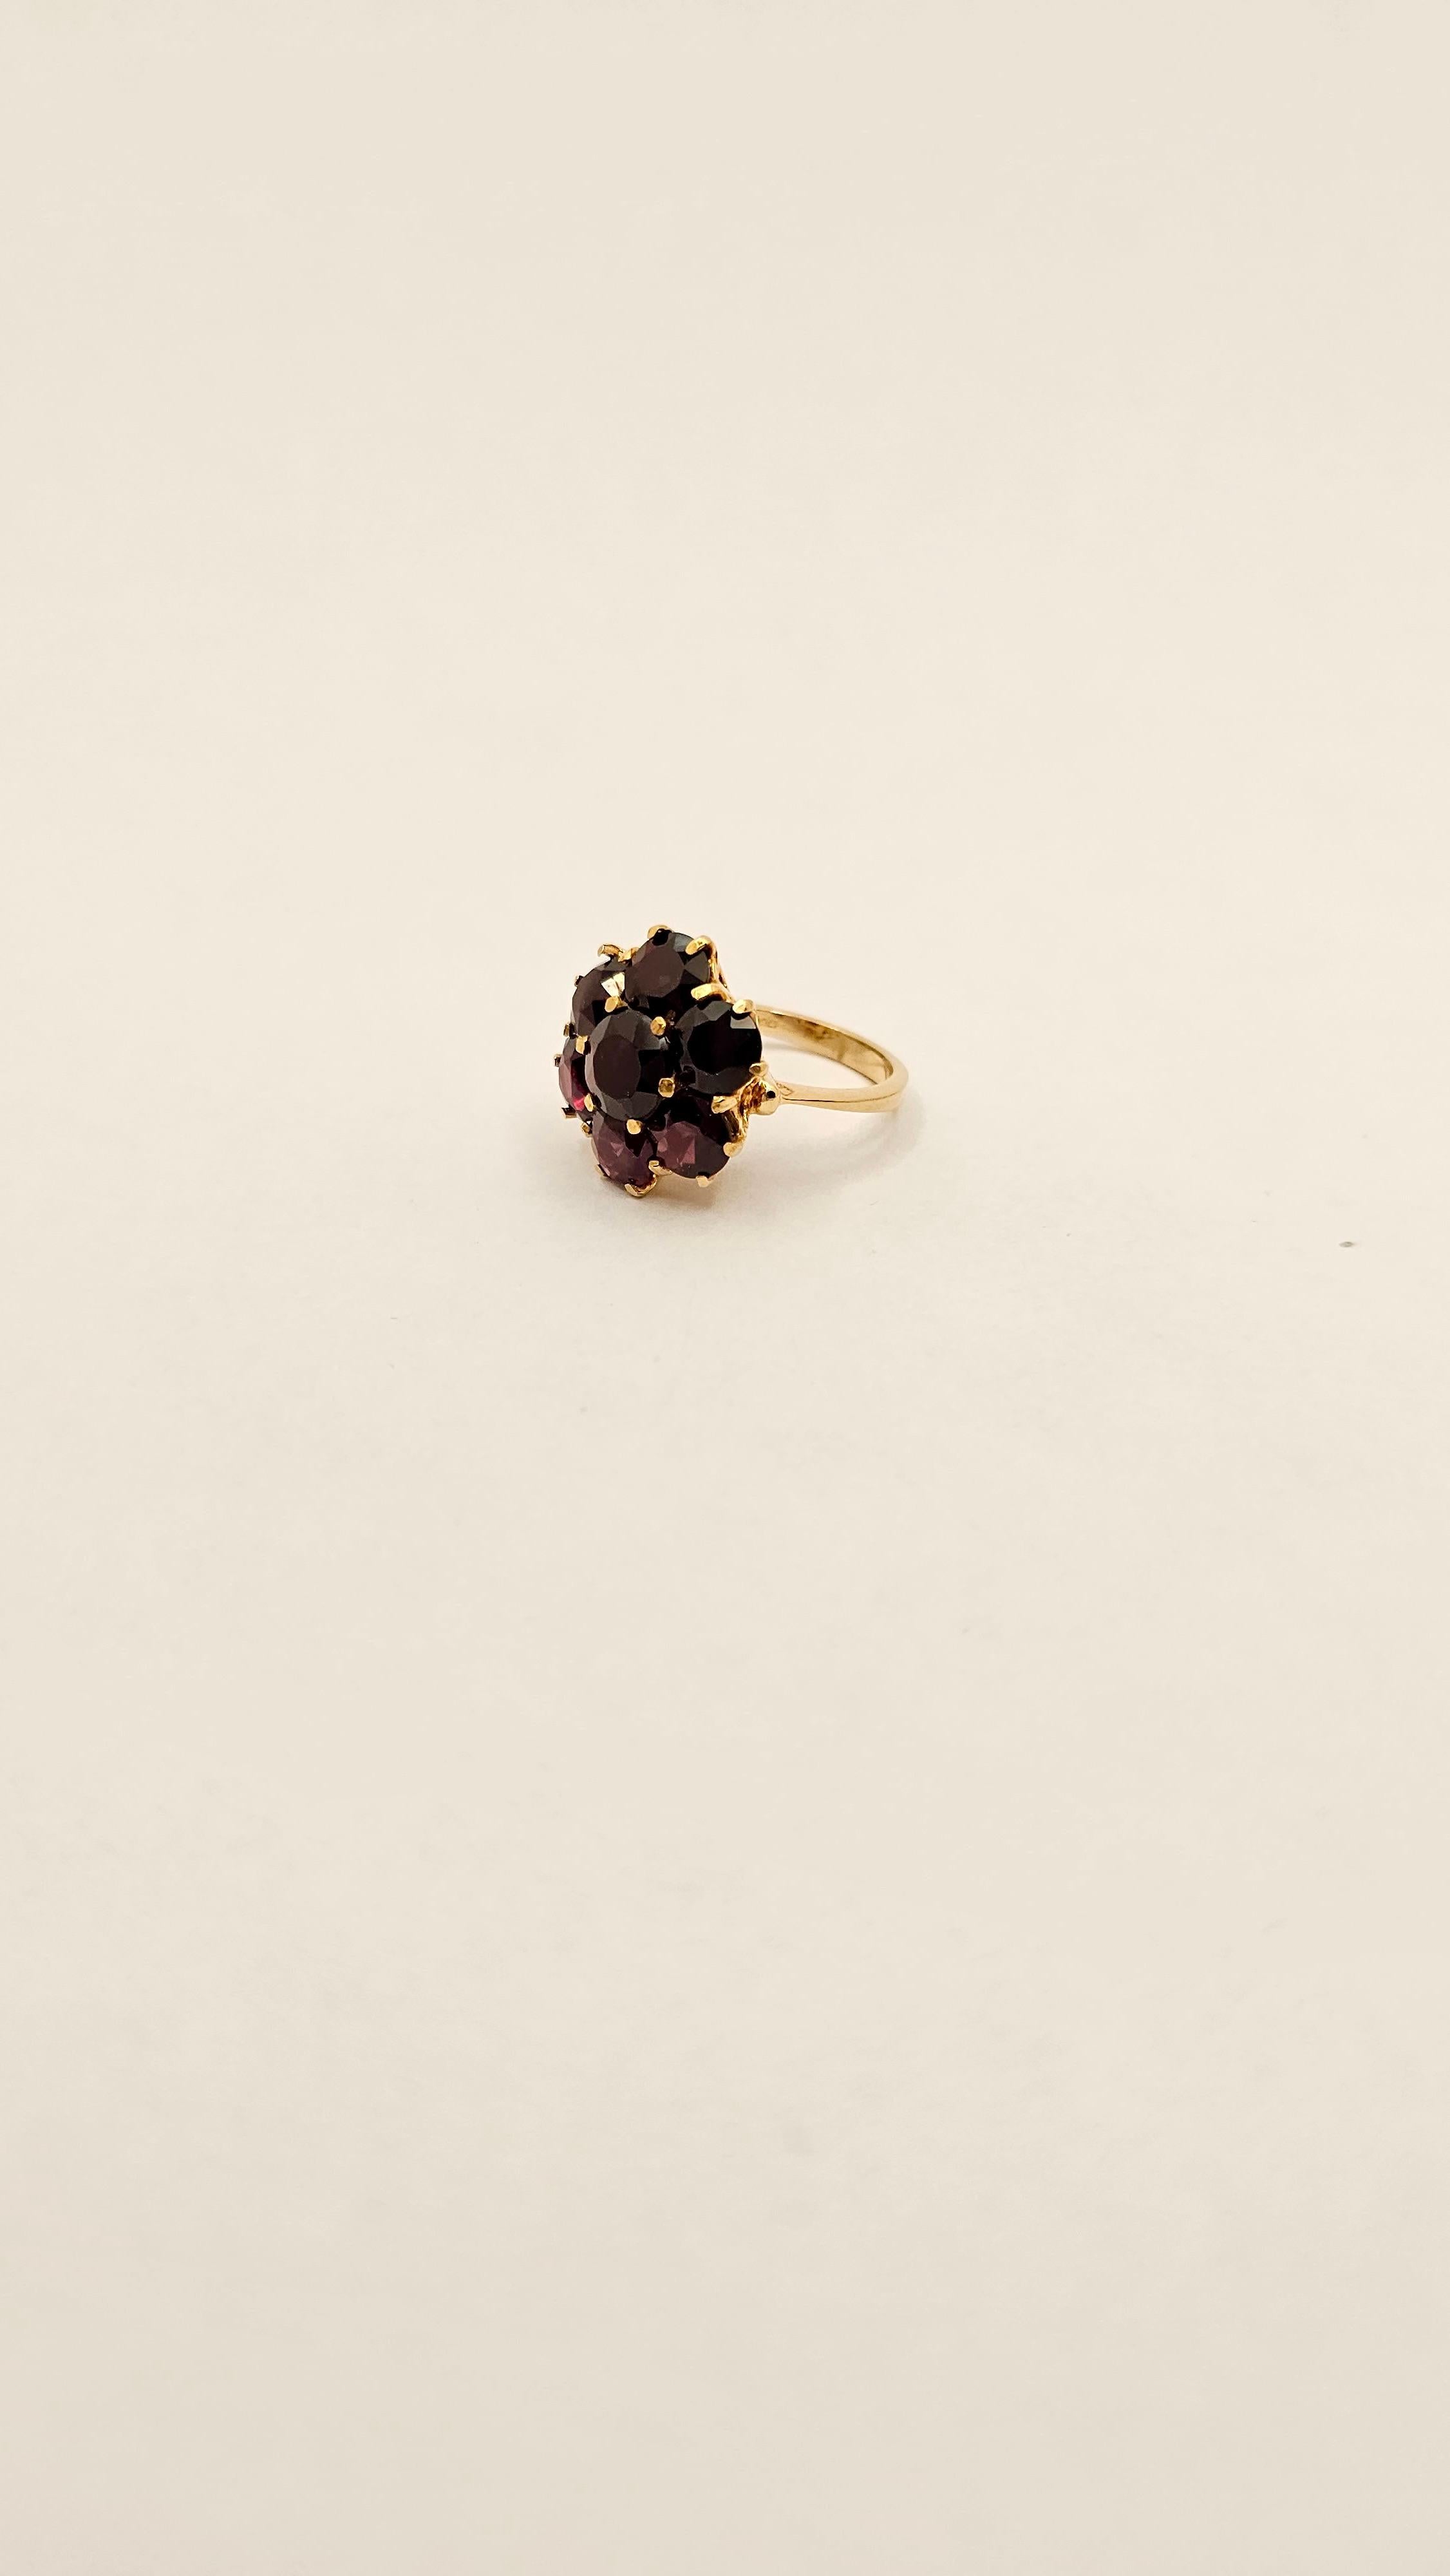 A 1950s Italian-made ring with a design typical of its era.
This ring is new, never worn.
The workmanship is meticulous in every detail, the part underneath the stones and pierced by hand creating a delightful pattern.
The gold's 750 title is marked